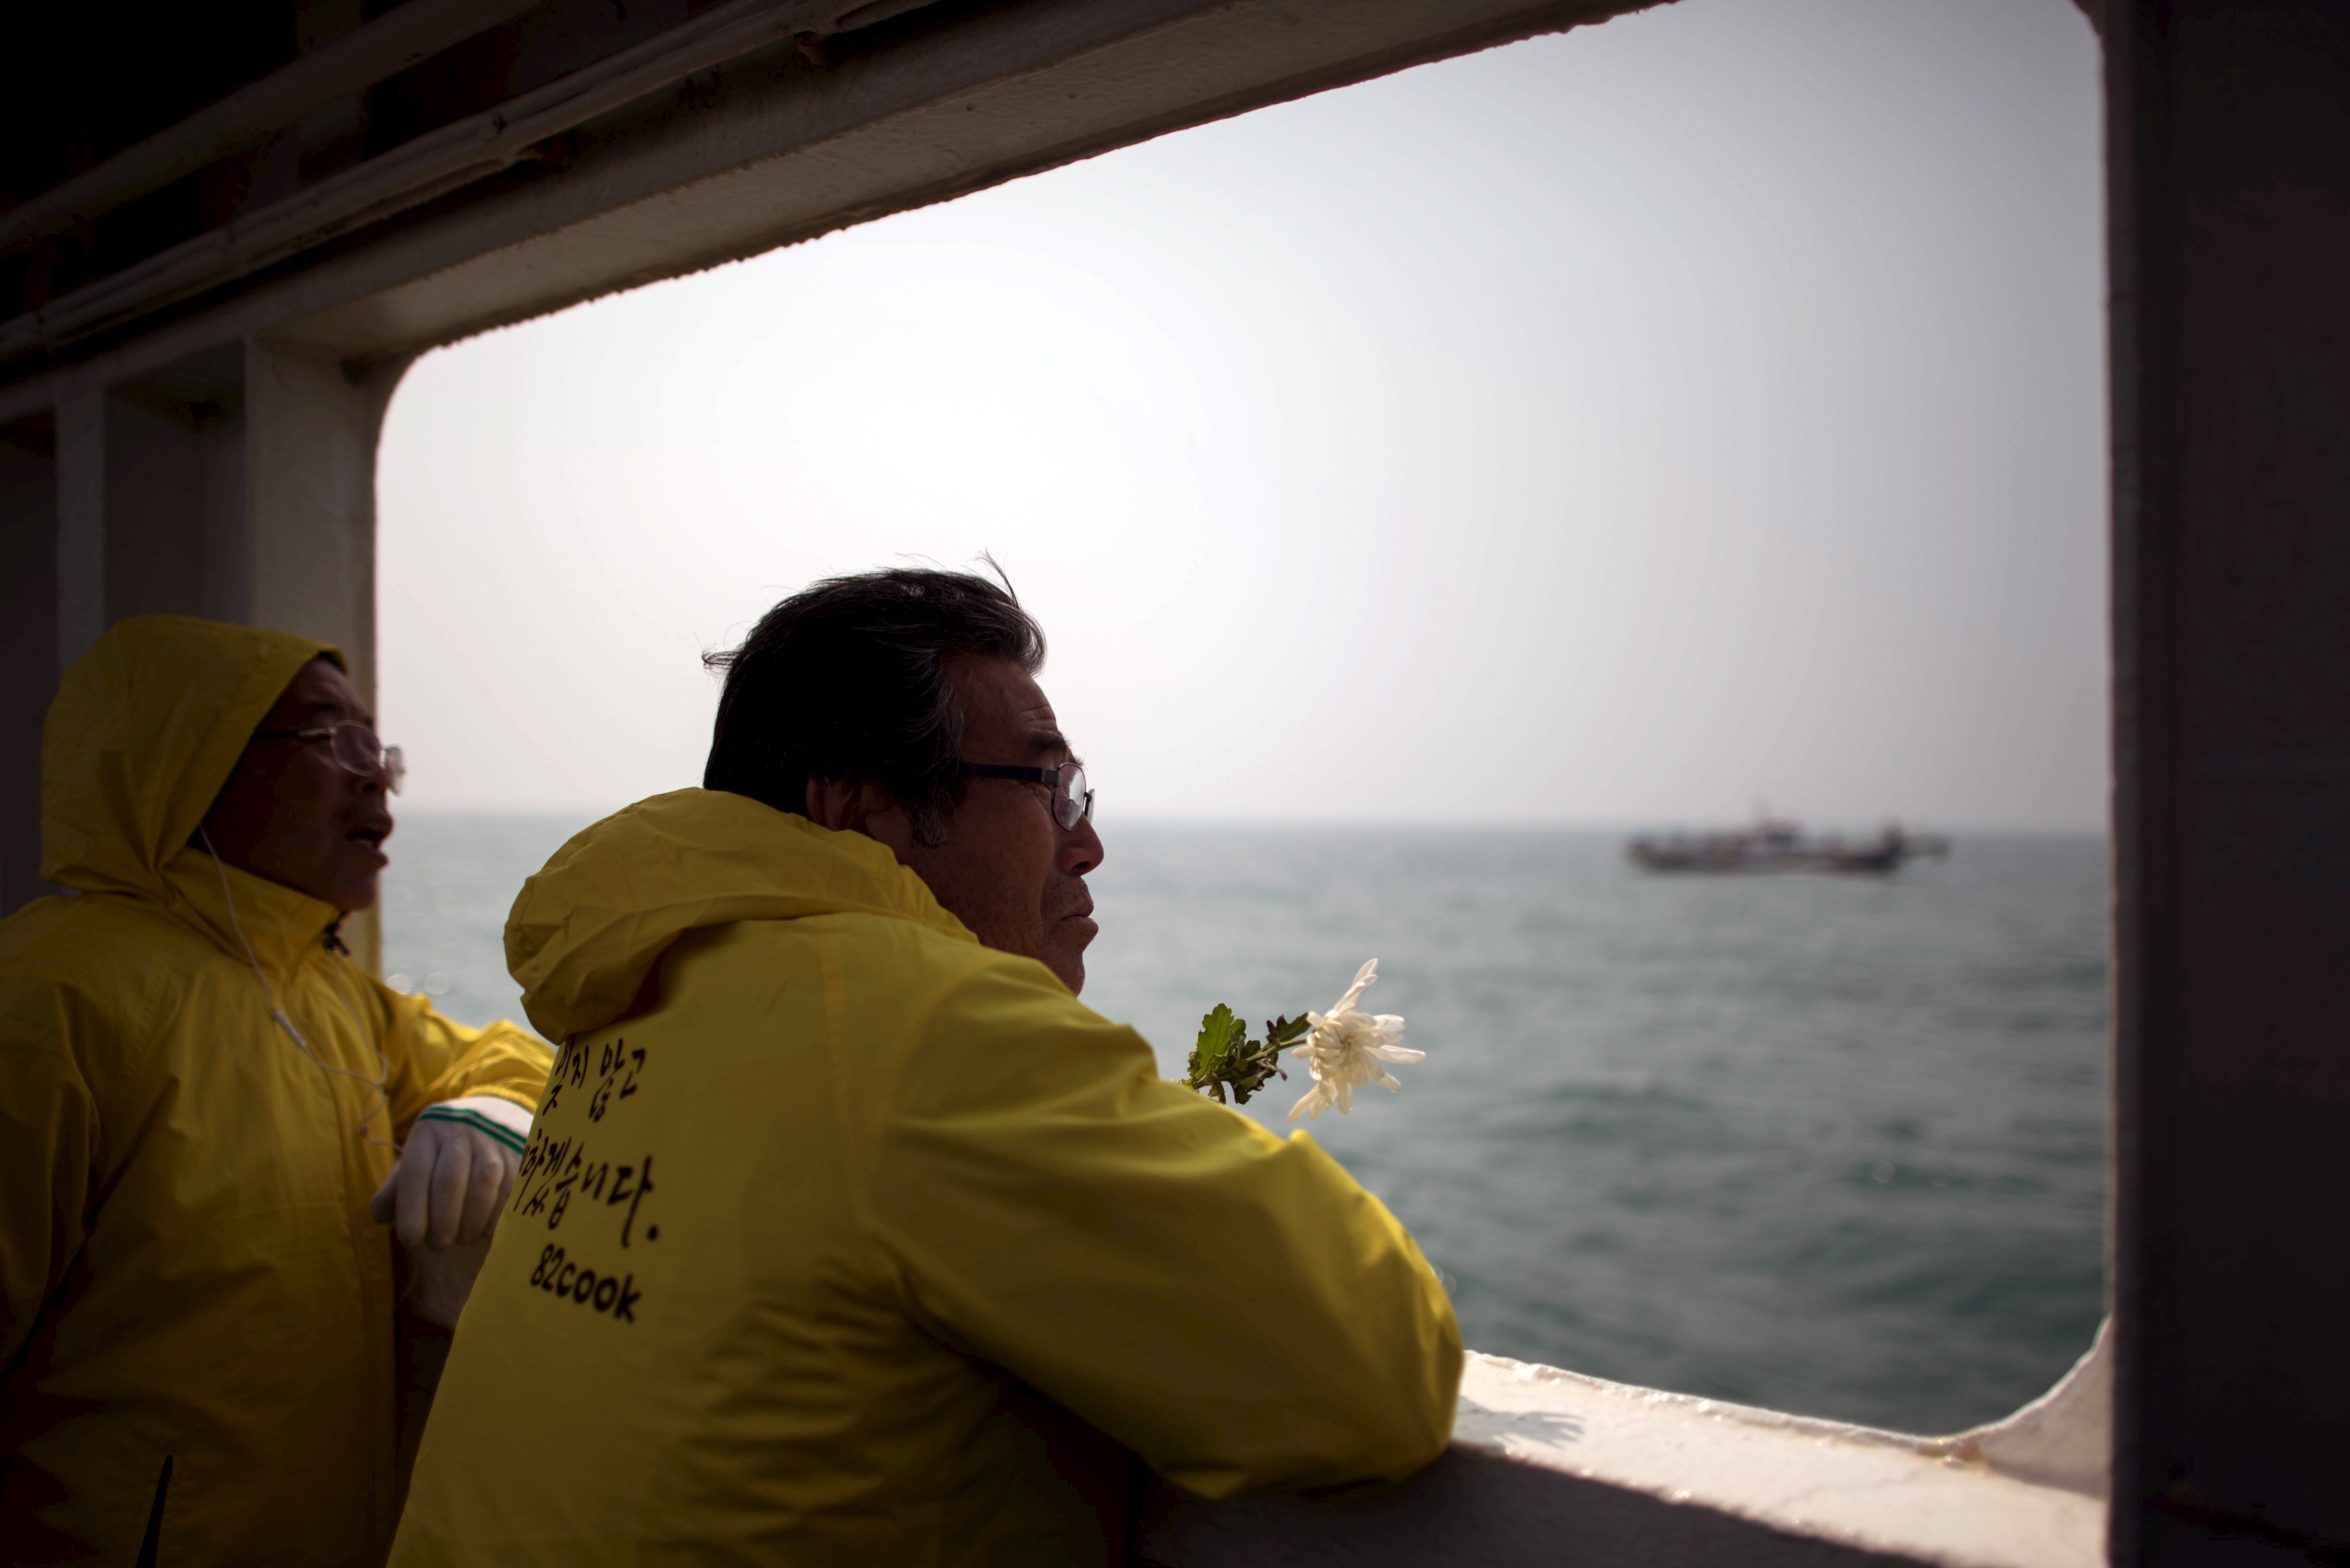 A relative of a victim of the Sewol ferry disaster holds a flower as he stands on the deck of a boat during a visit to the site of the sunken ferry, off the coast of South Korea's southern island of Jindo